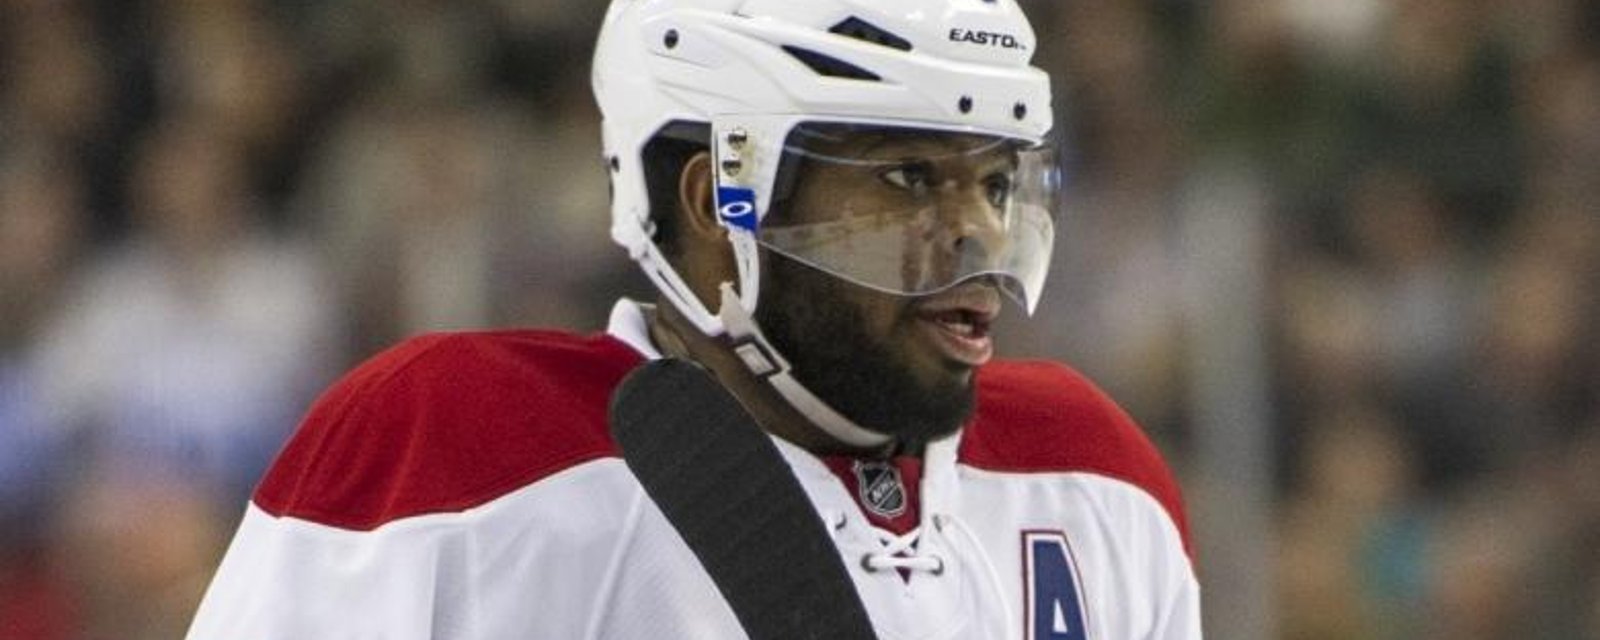 P.K. Subban tries to get cute, costs his team a goal.